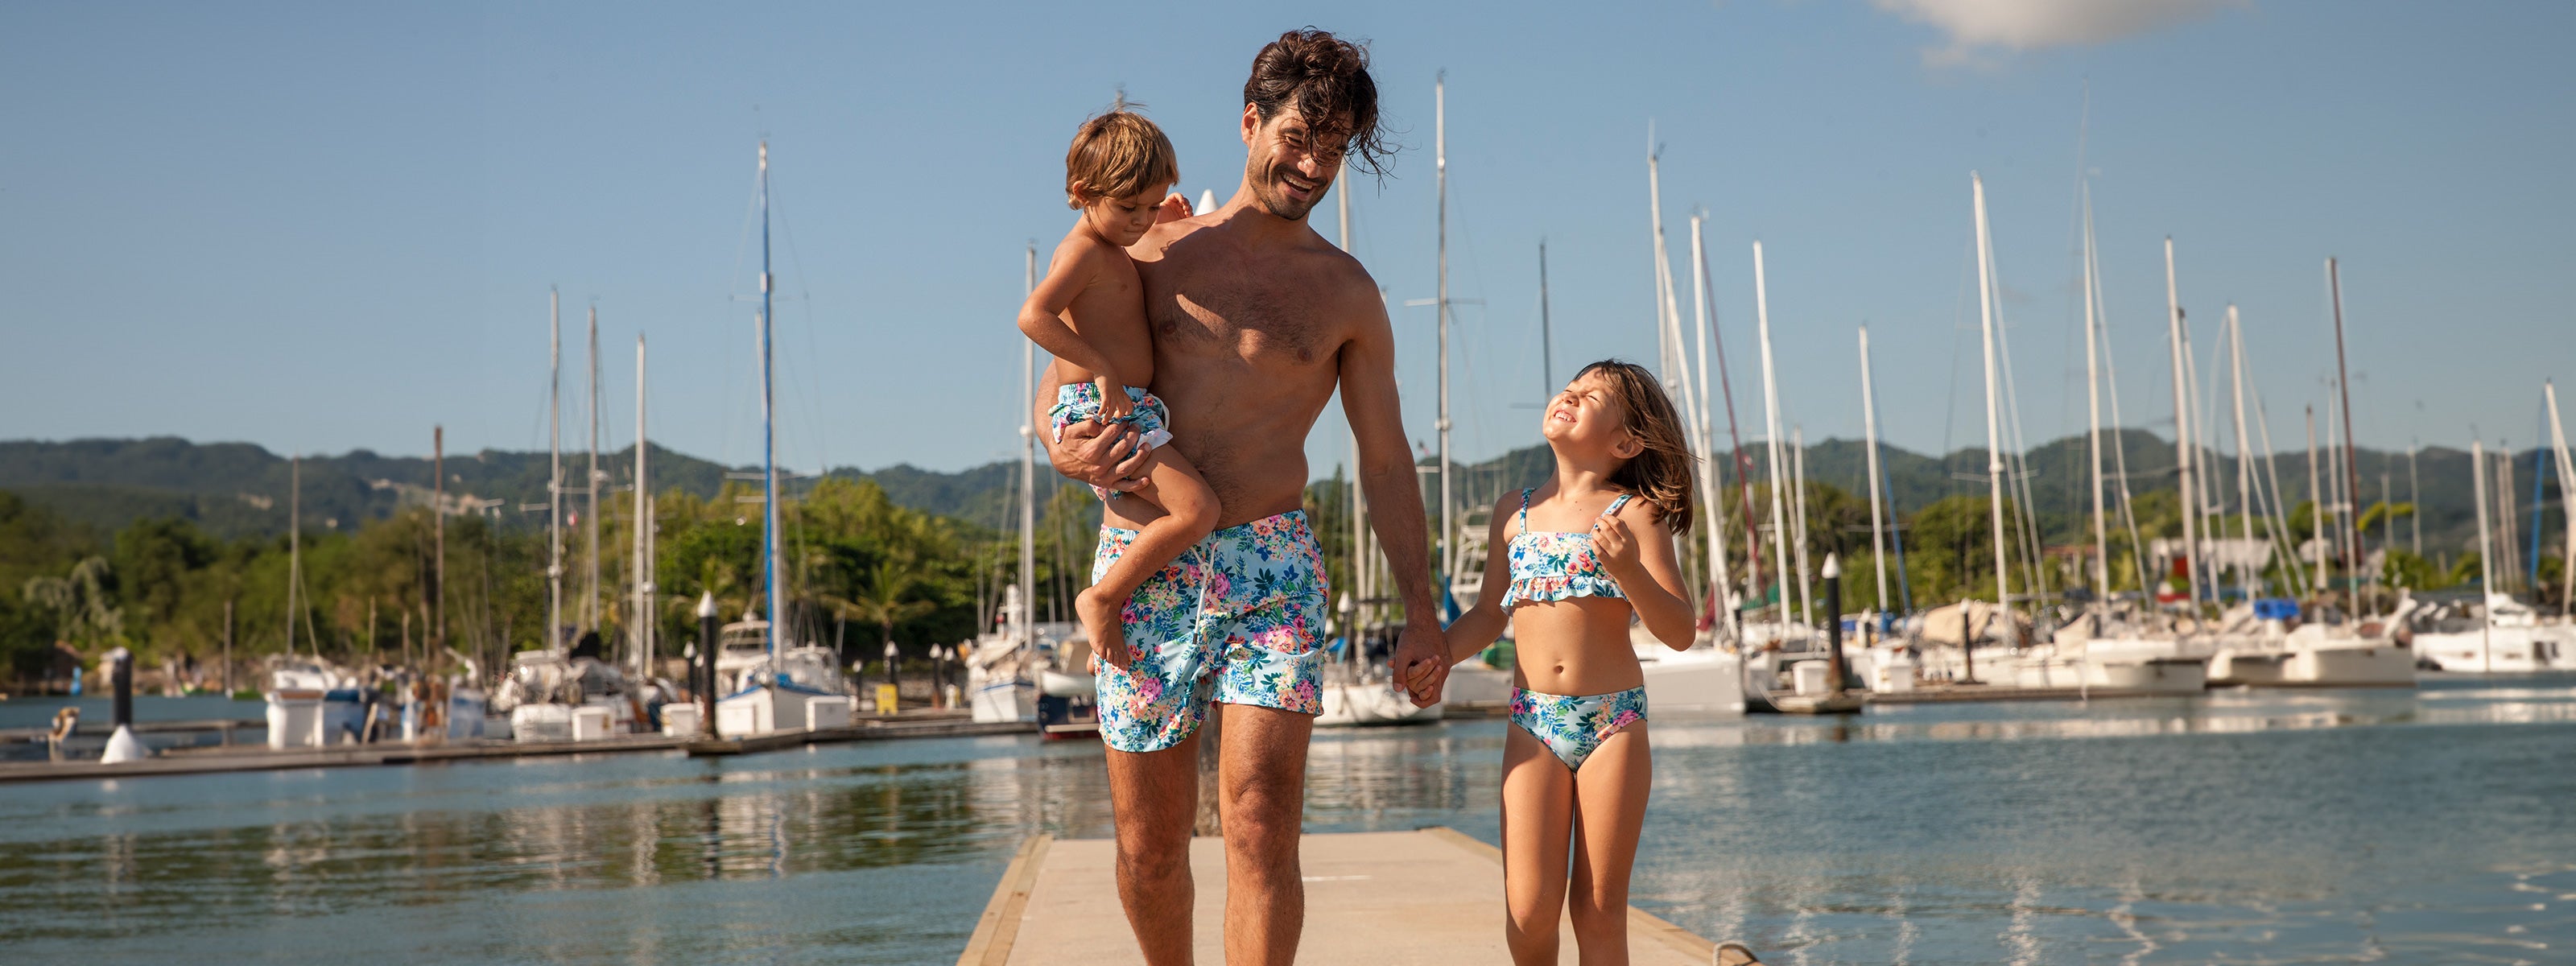 Swimsuits, Beachwear and Accessories for Men, Boys, Women and Girls. By 98 Coast Av. USA.